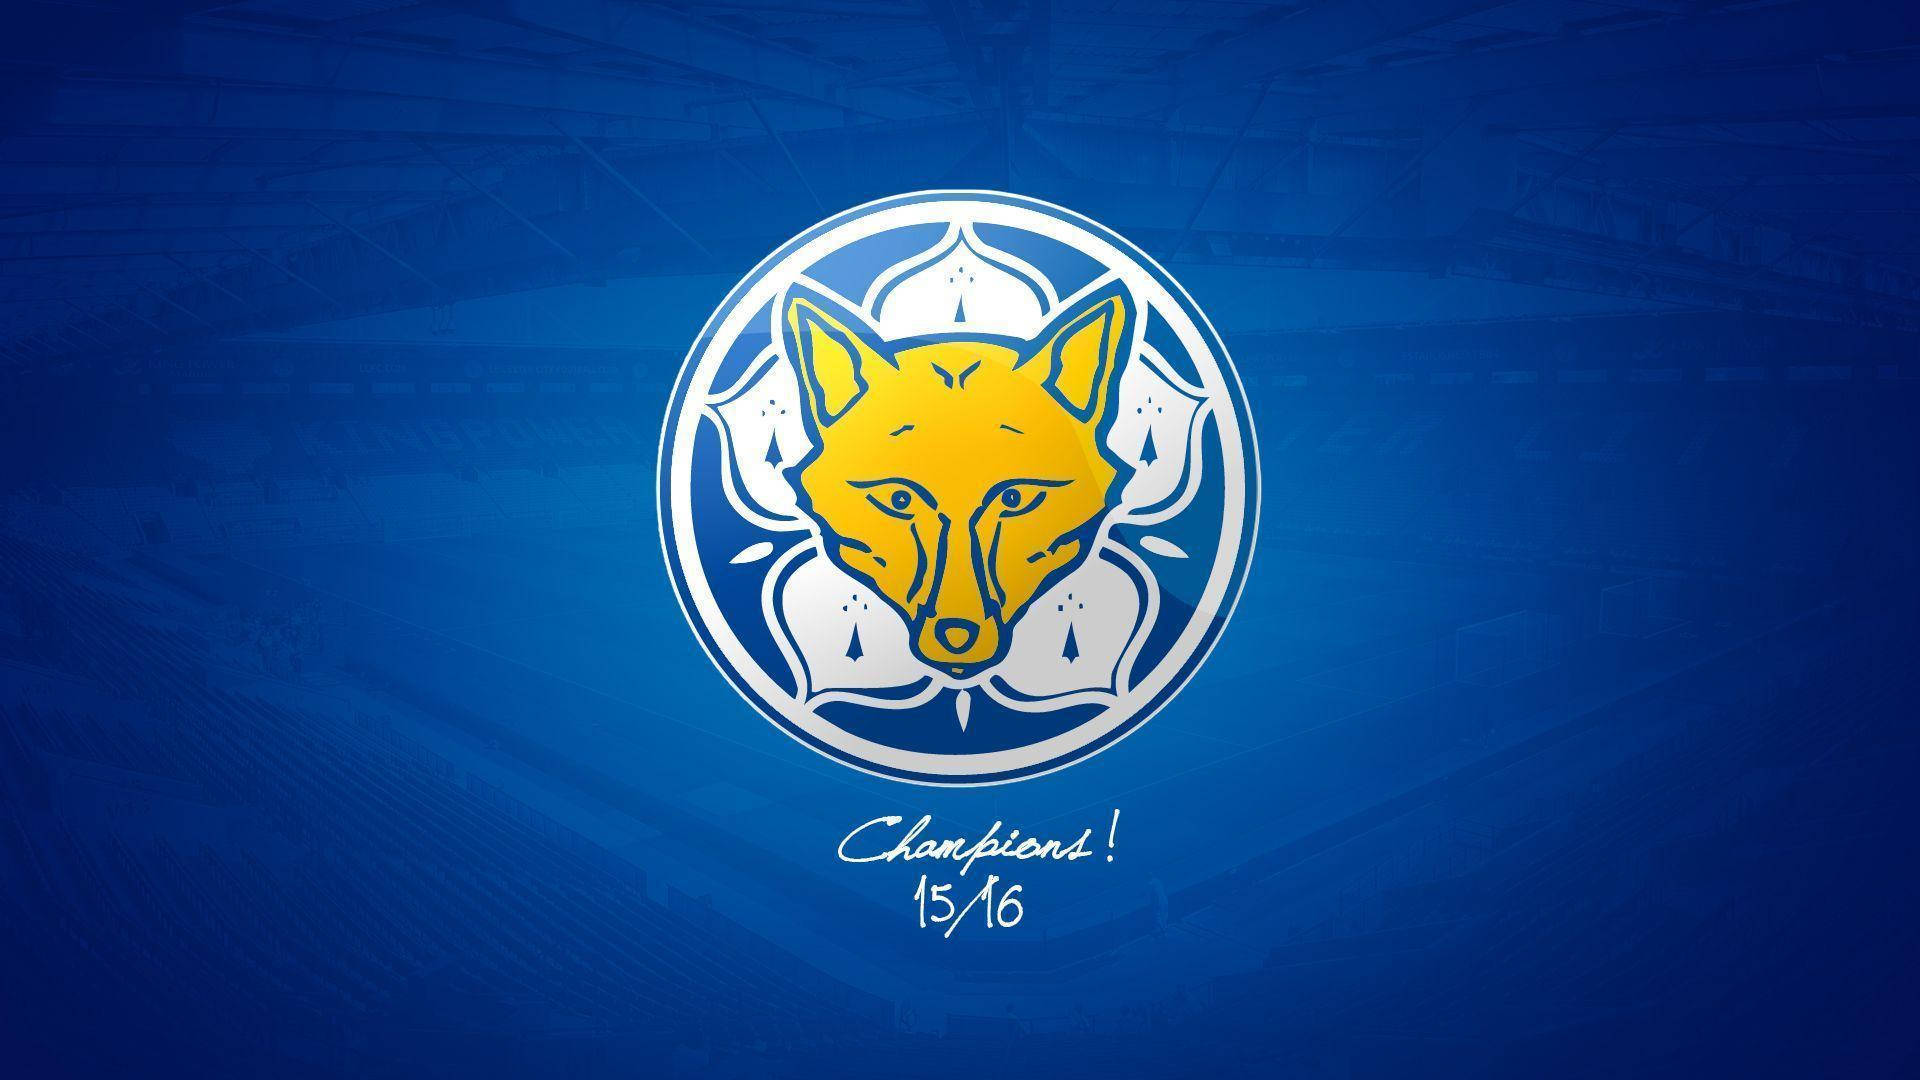 Leicester City - The Champions of England Wallpaper